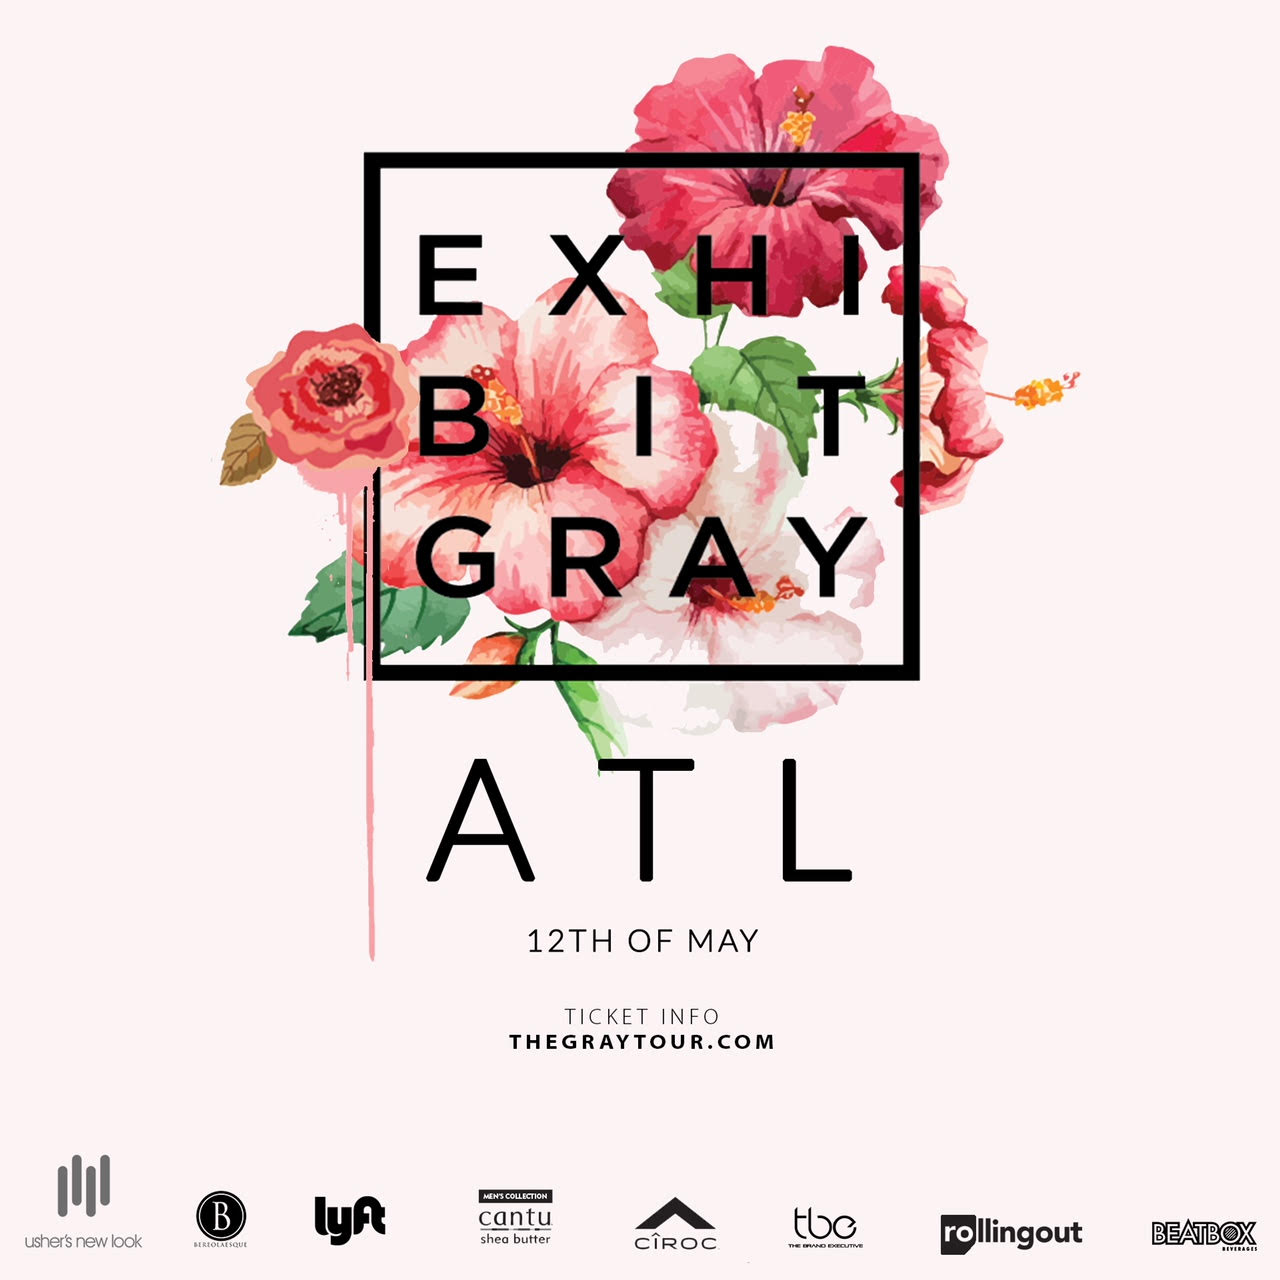 The Exhibit Gray Tour Comes to Atlanta for a Exclusive Private Mansion Experience